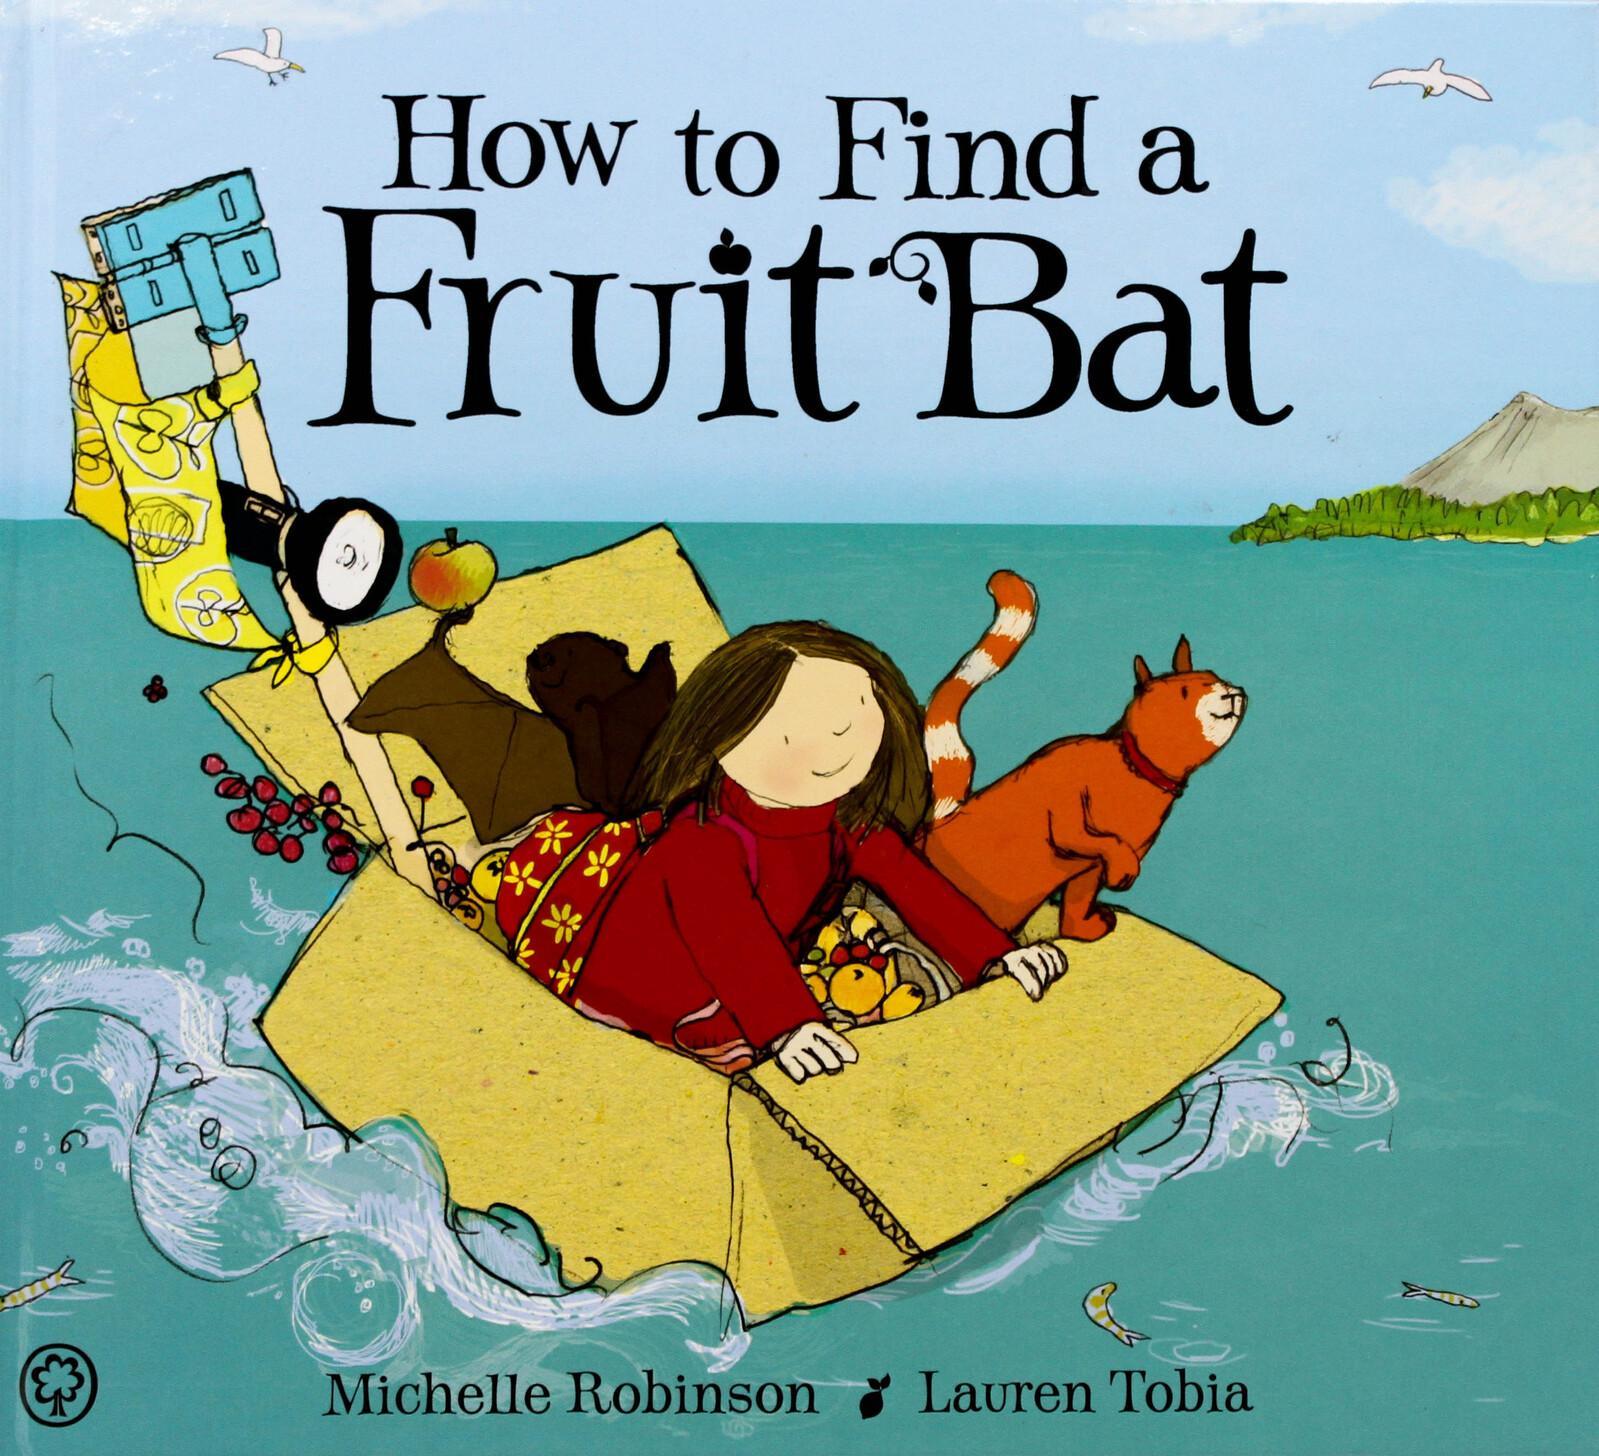 How to Find a Fruit Bat -Michelle Robinson Hardcover Children's Book